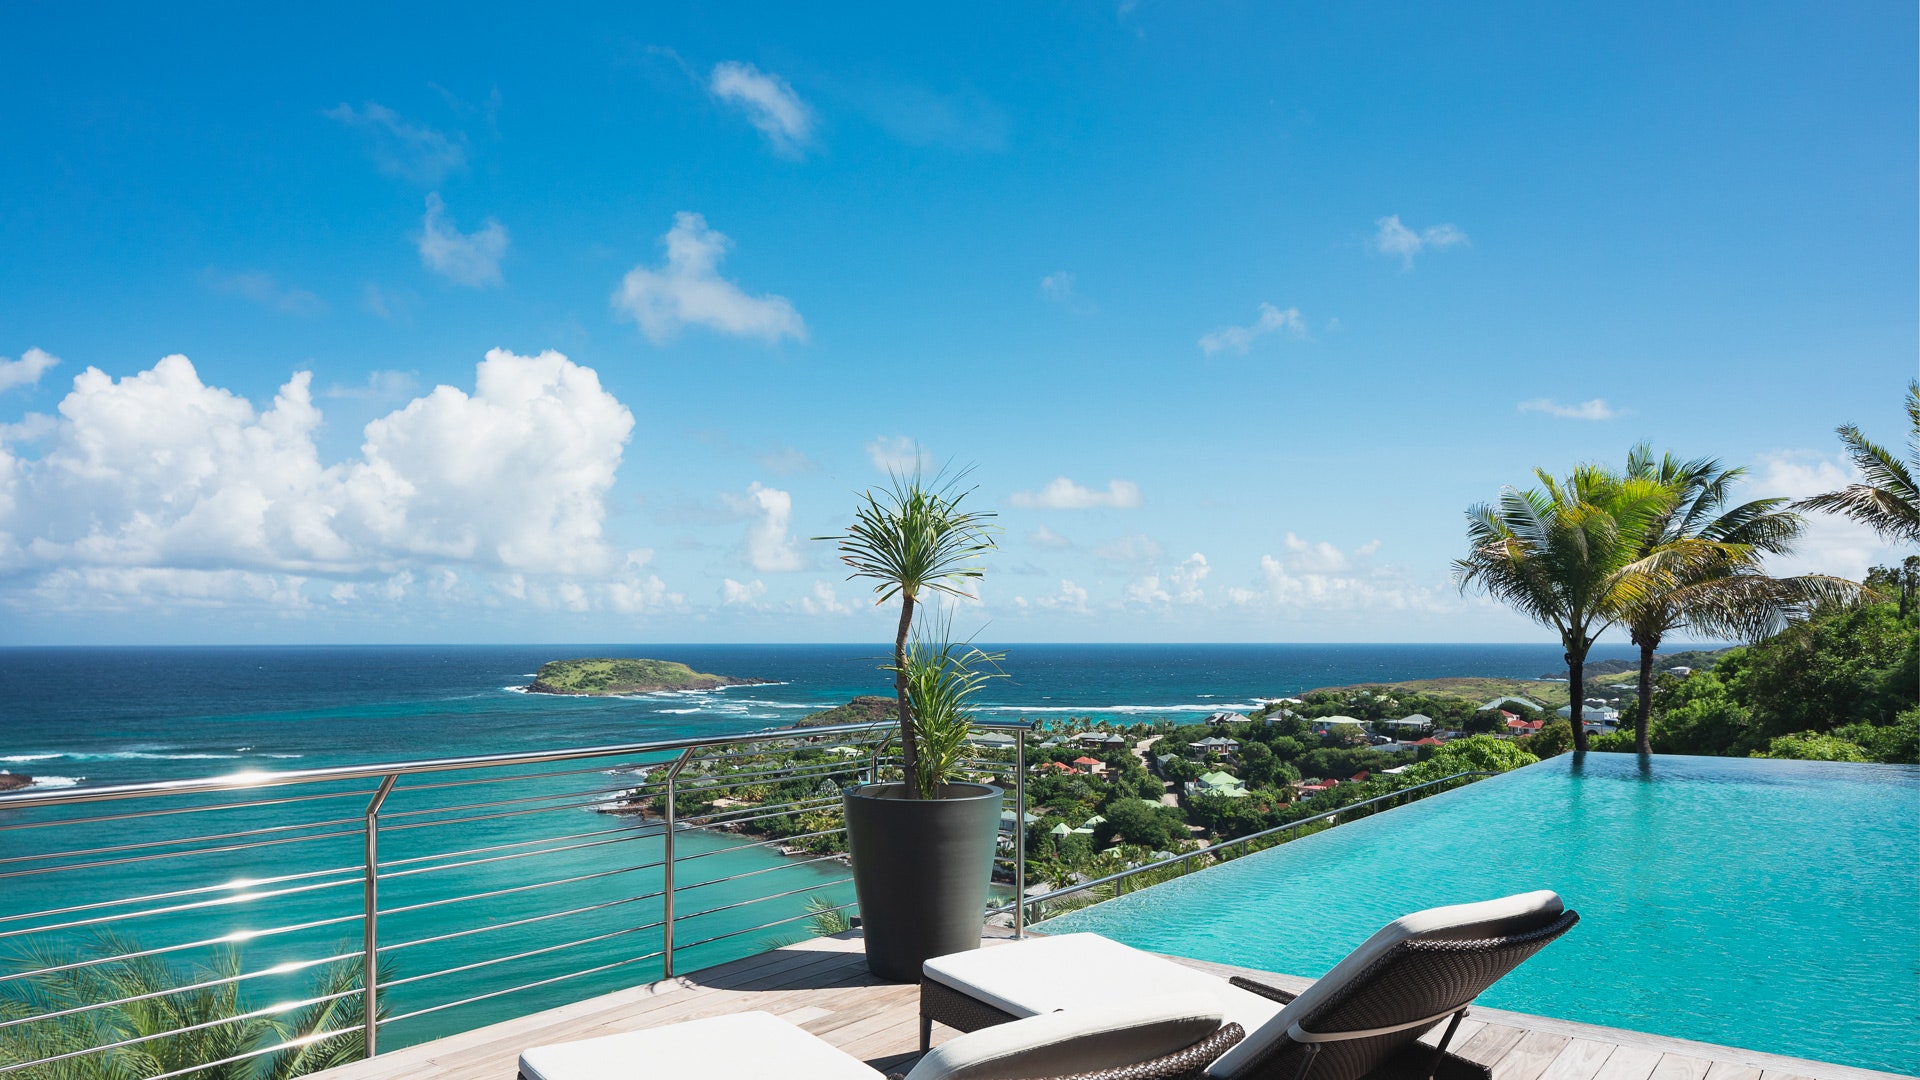 two chairs and an infinity pool on a deck overlooking the ocean